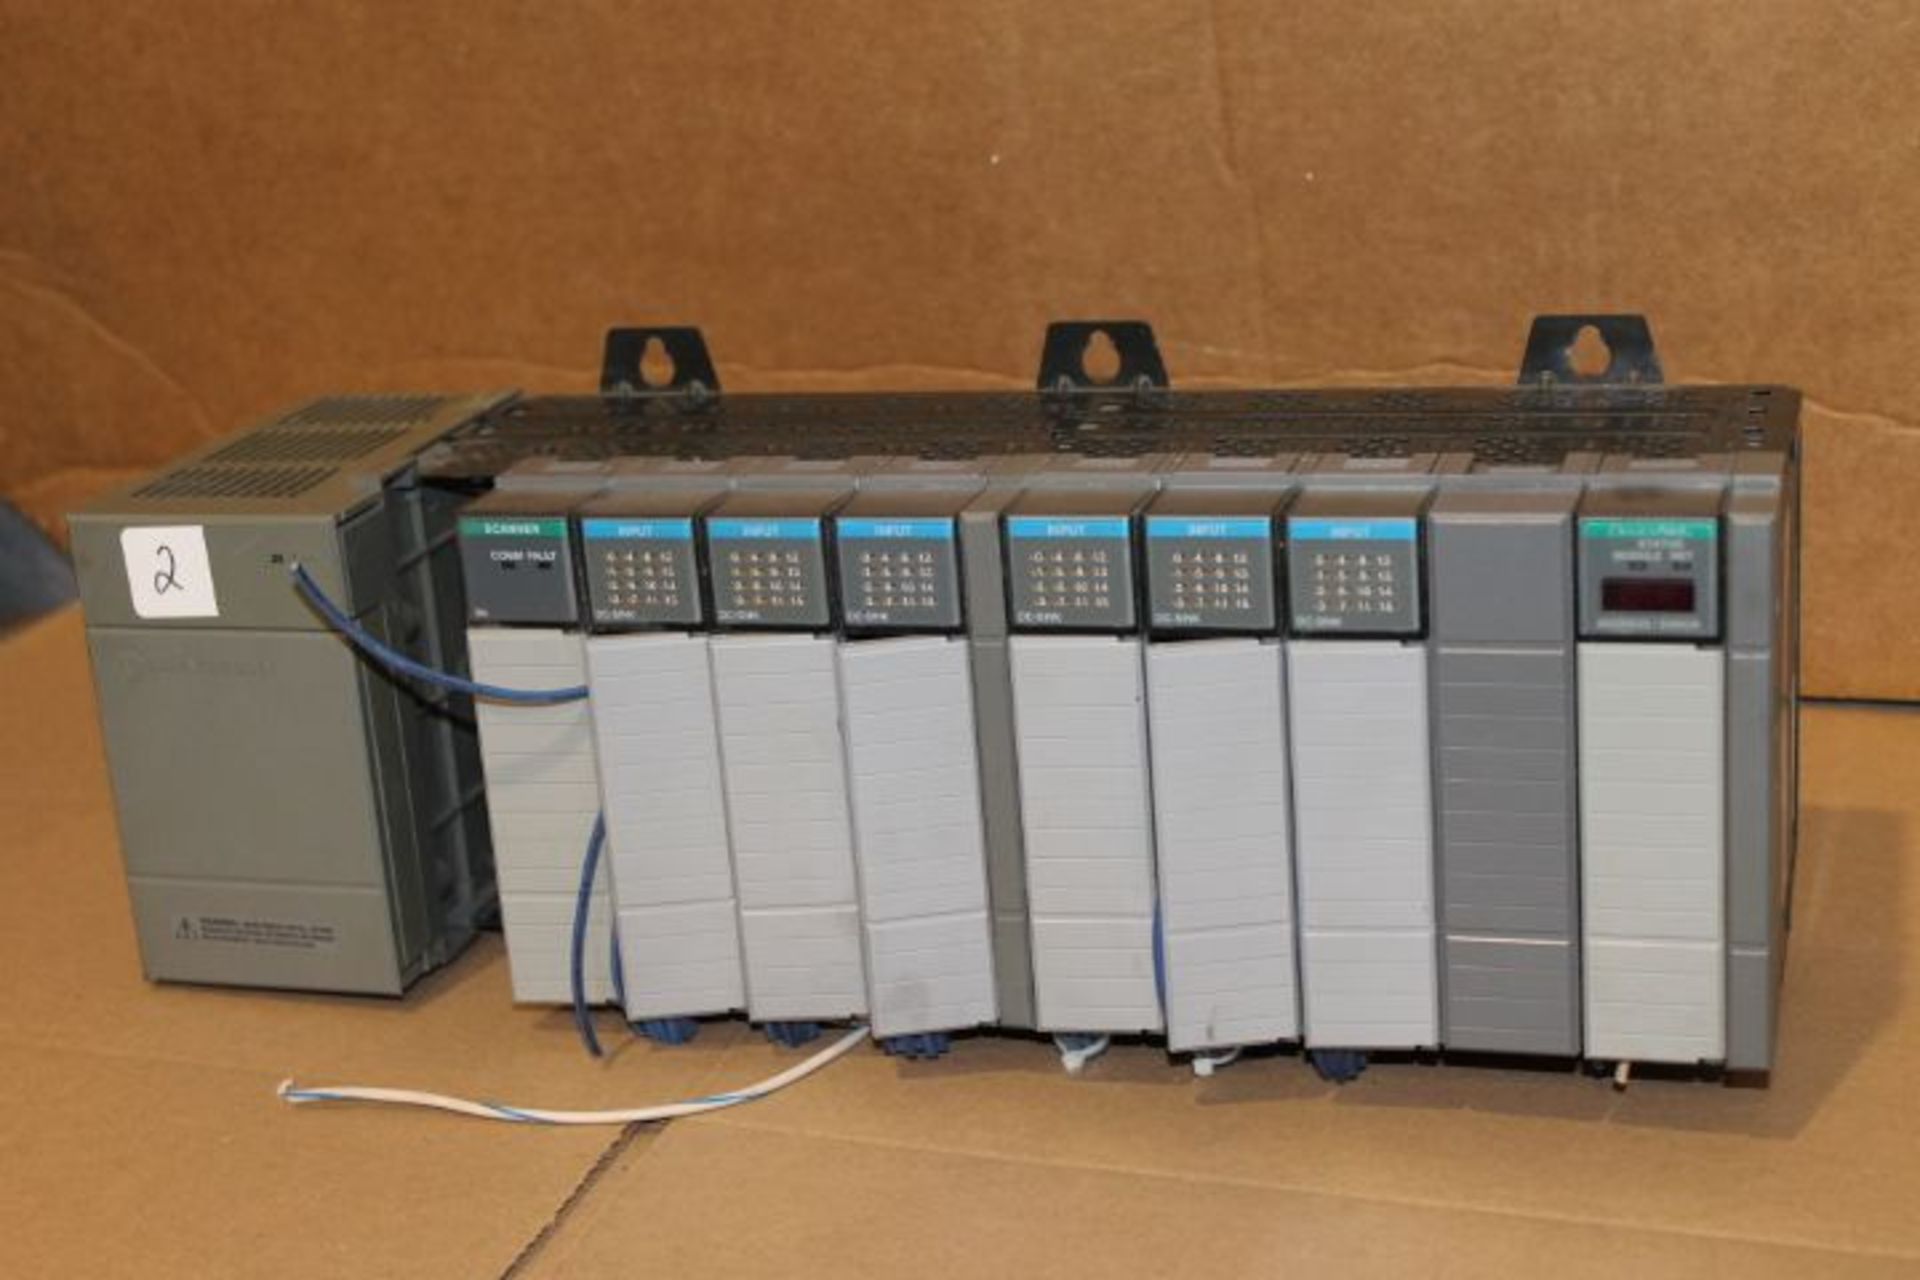 AB SLC 500 10-Slot Rack 1746-A10 with 8 Cards and Power Supply